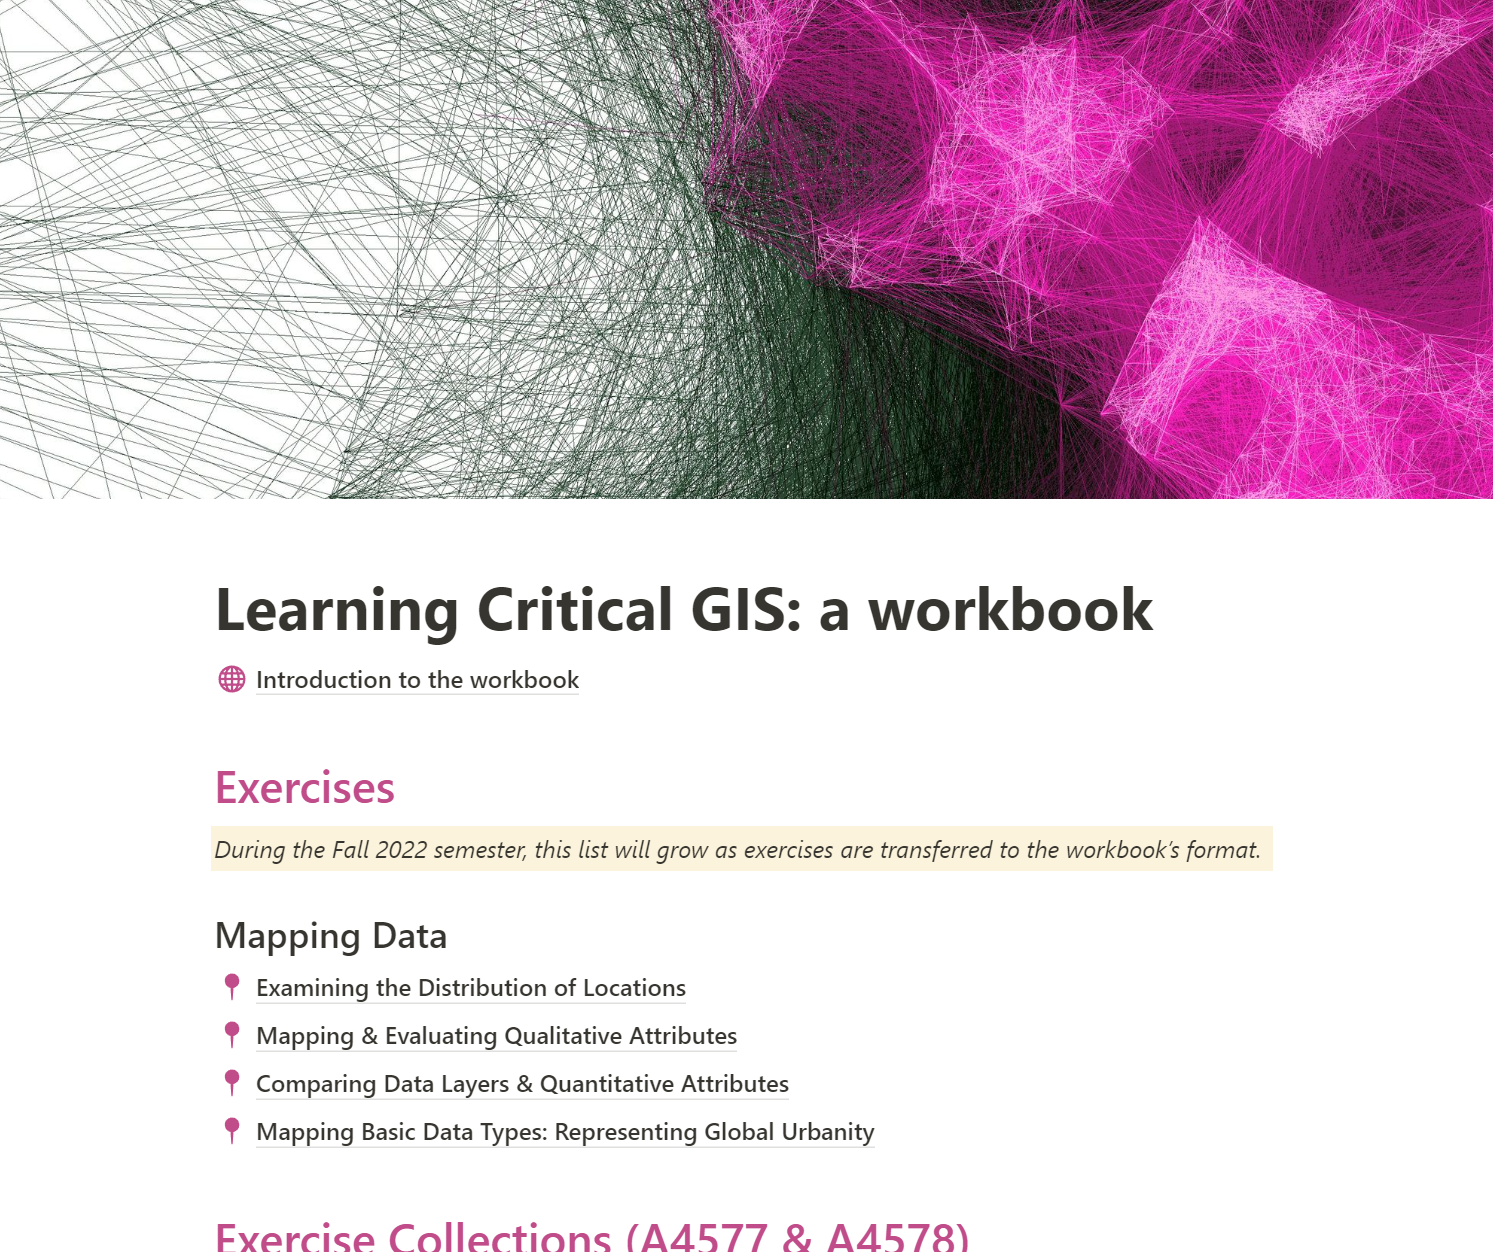   6 Sep:    Learning Critical GIS: a Workbook     is going live for students (and teachers) of context-driven, urban GIS. More updates through the Fall 2022 semester. 